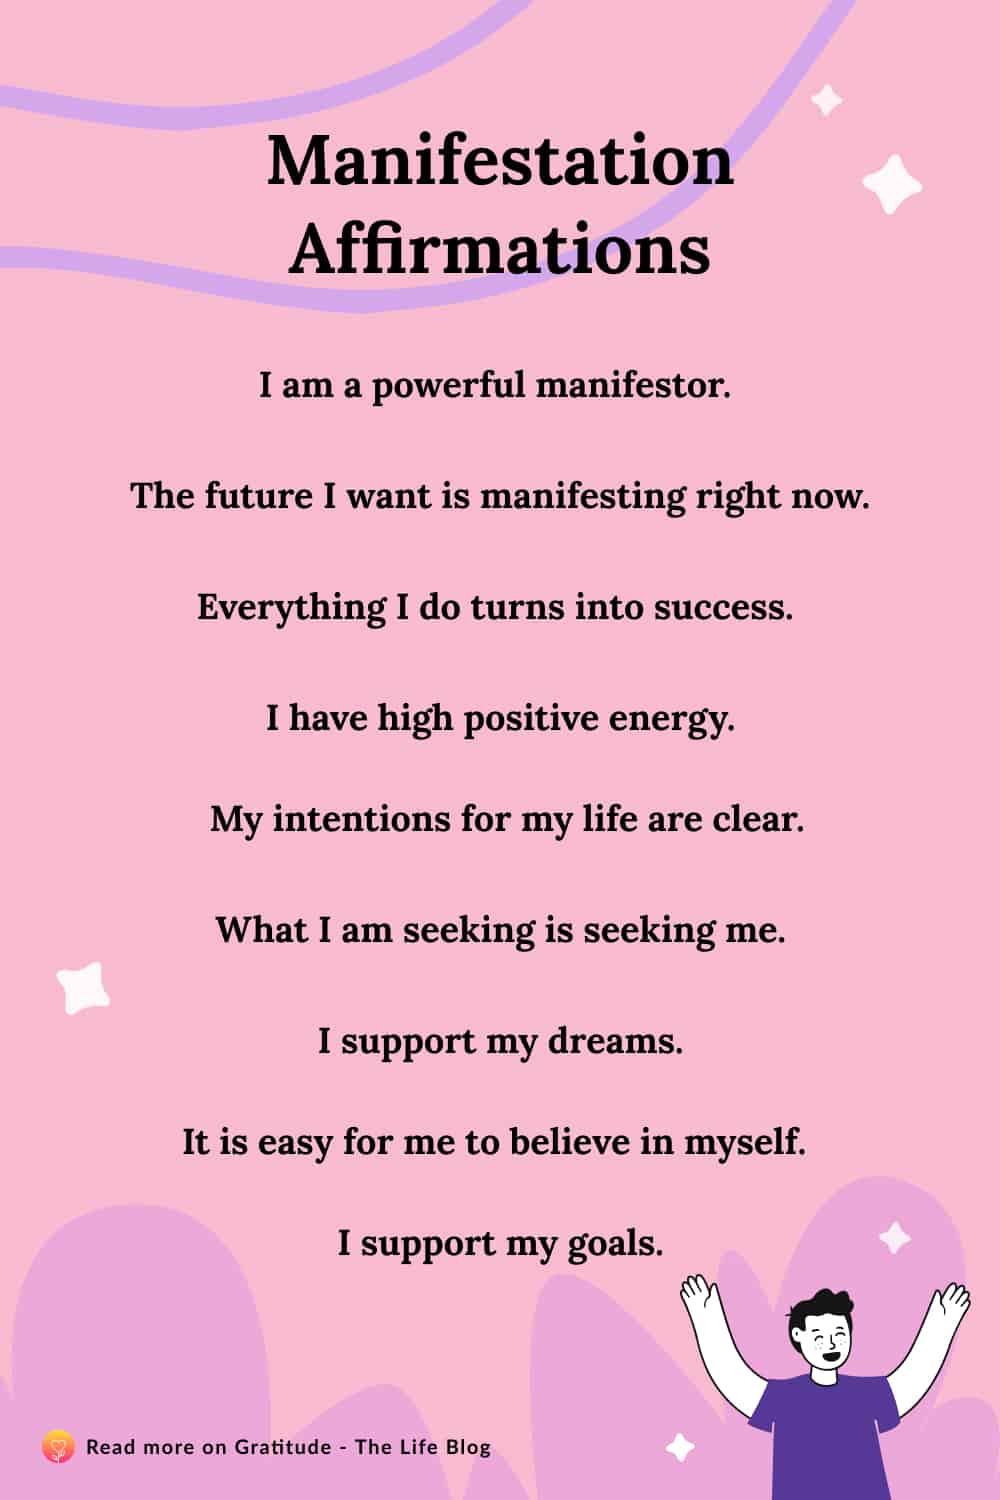 What are some good manifestations?